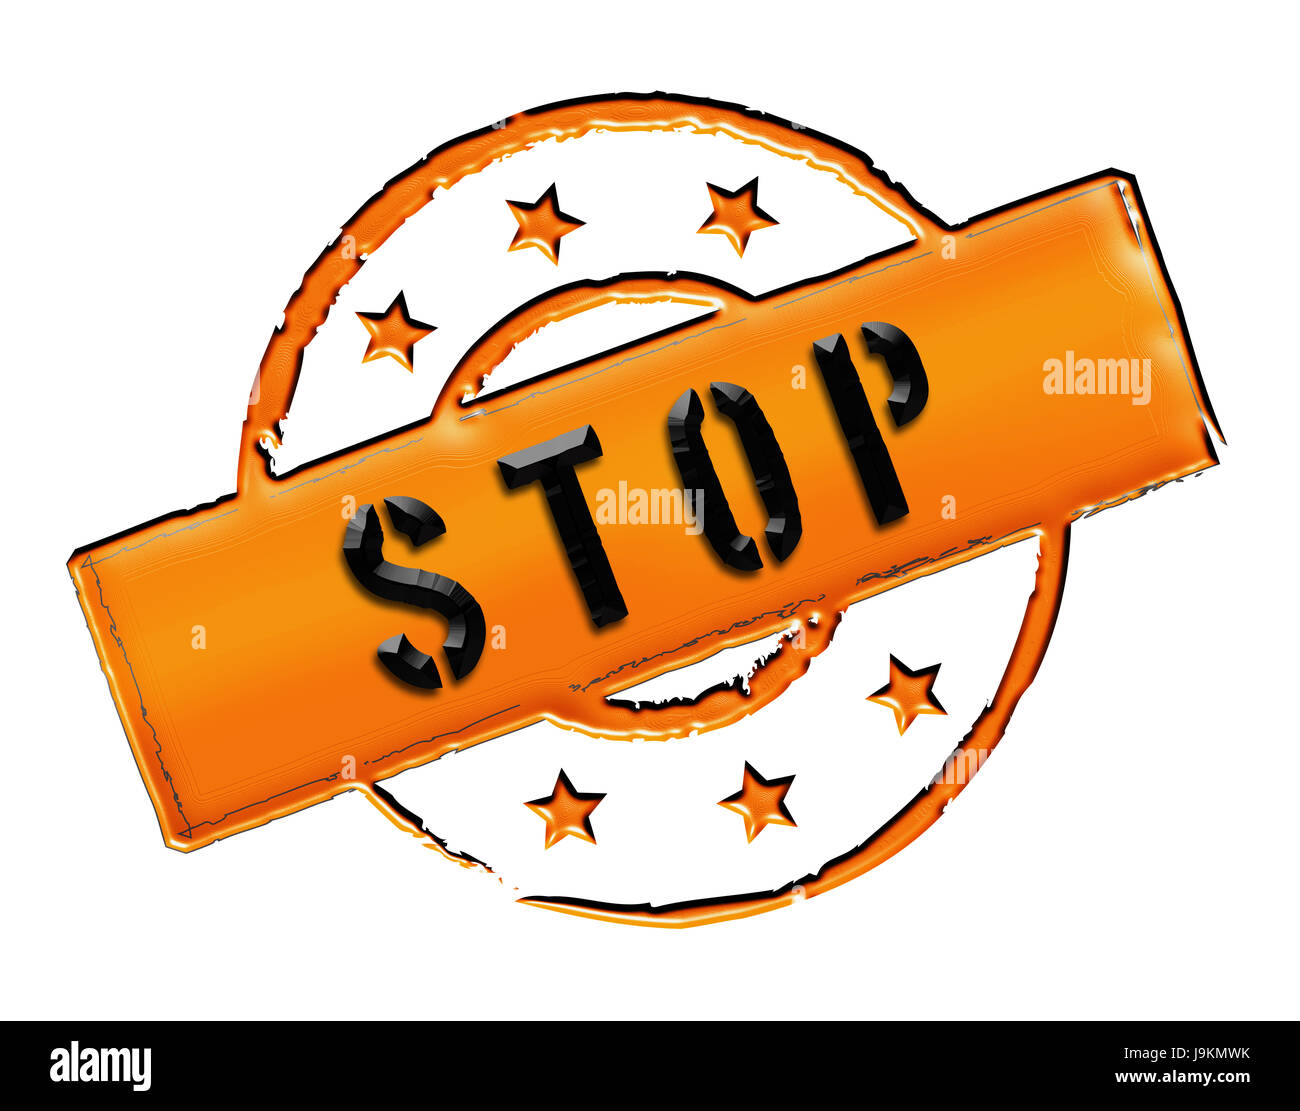 end, stop, stops, aborting, isolated, caution, no, end, important, stop, Stock Photo